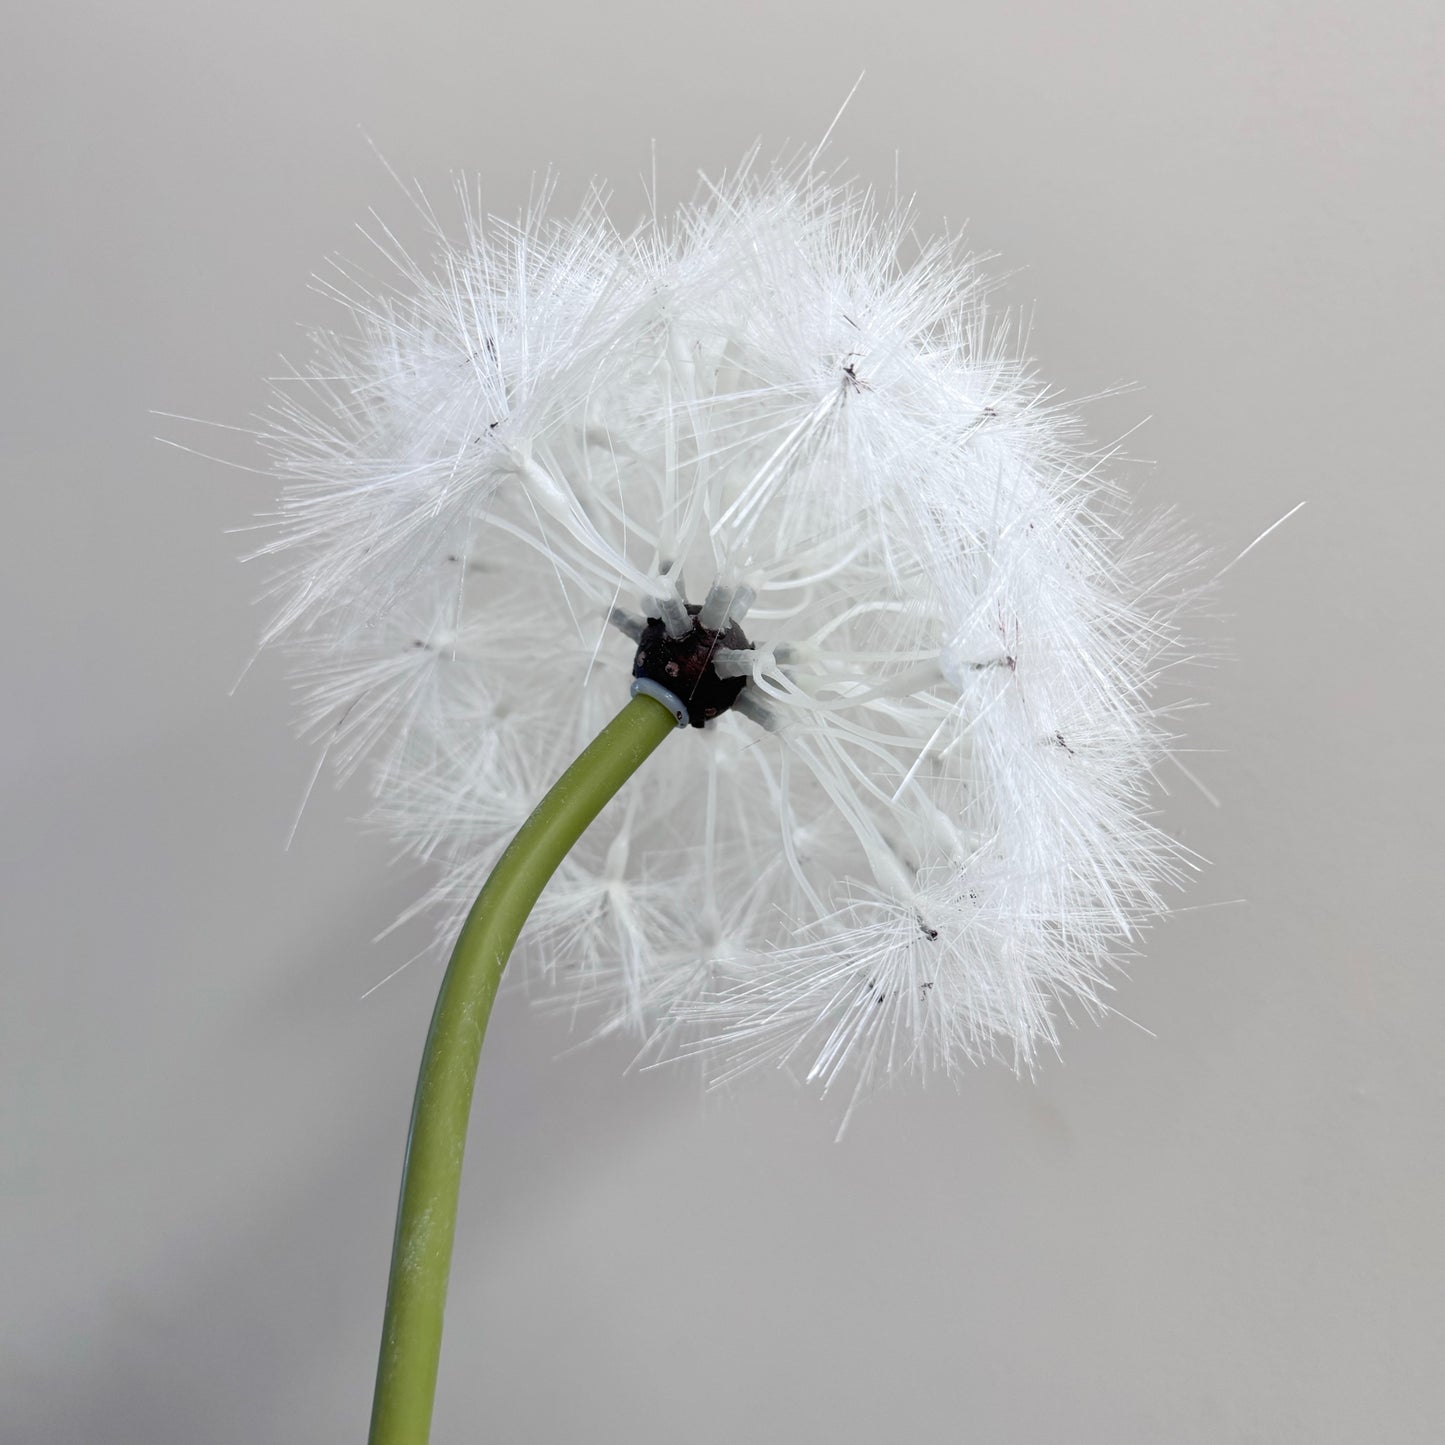 Set of 2 Elegant Bendable Artificial Dandelion Stems, 27 inches Tall